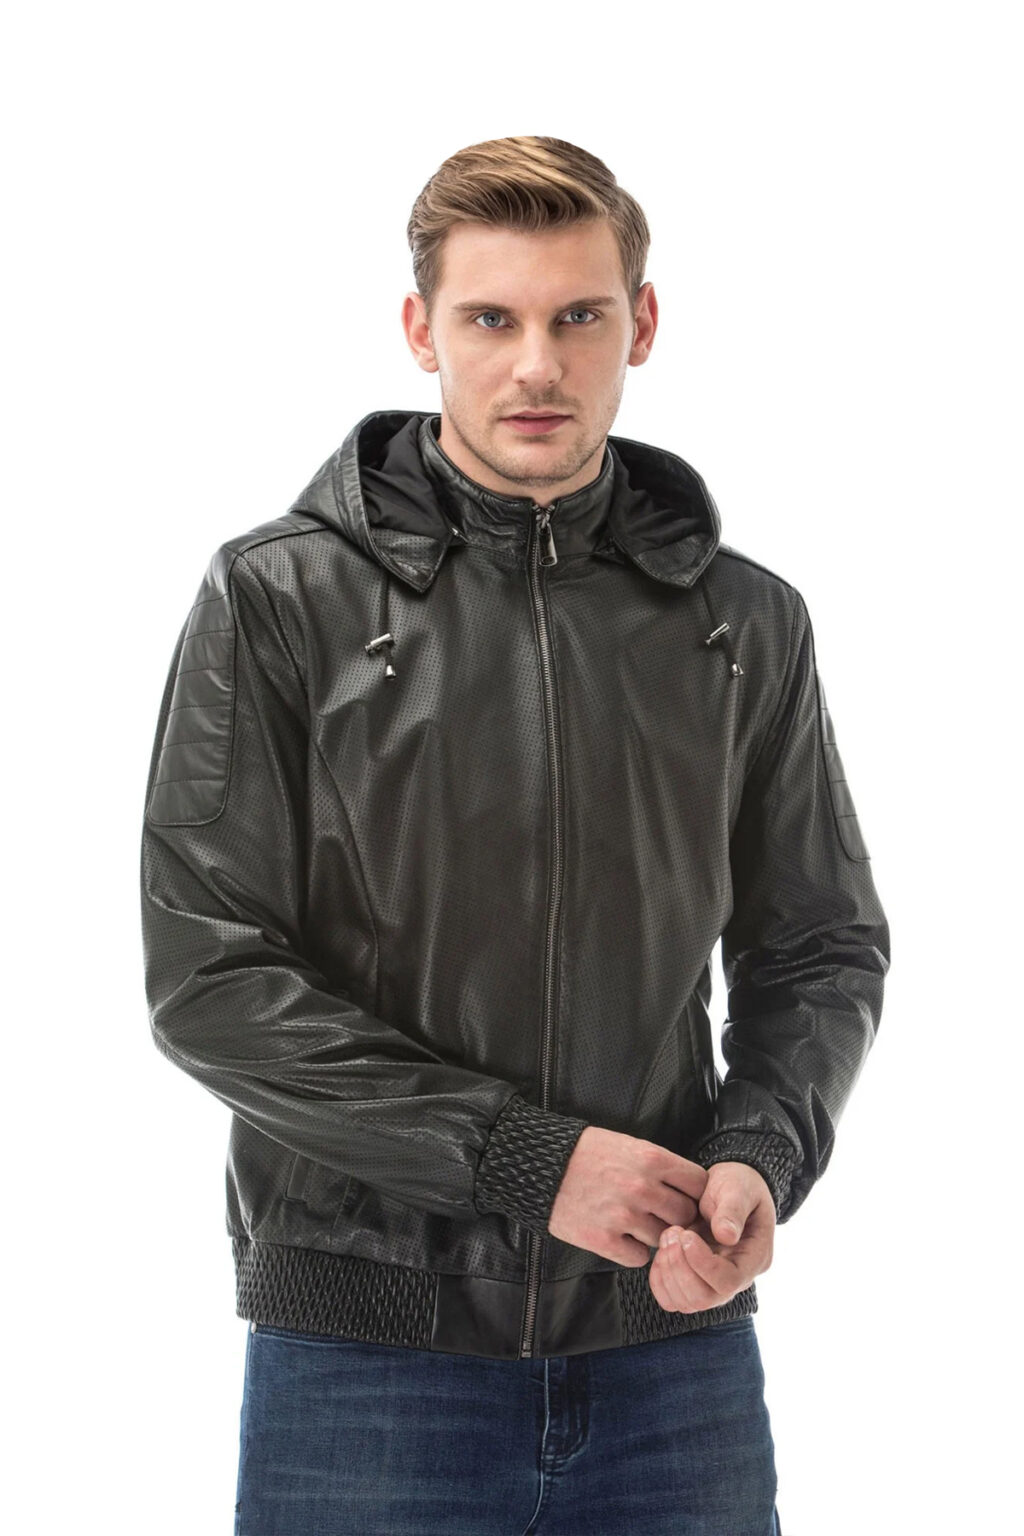 Lifestyle Leather Jackets Store for Men's and Women's | UFS